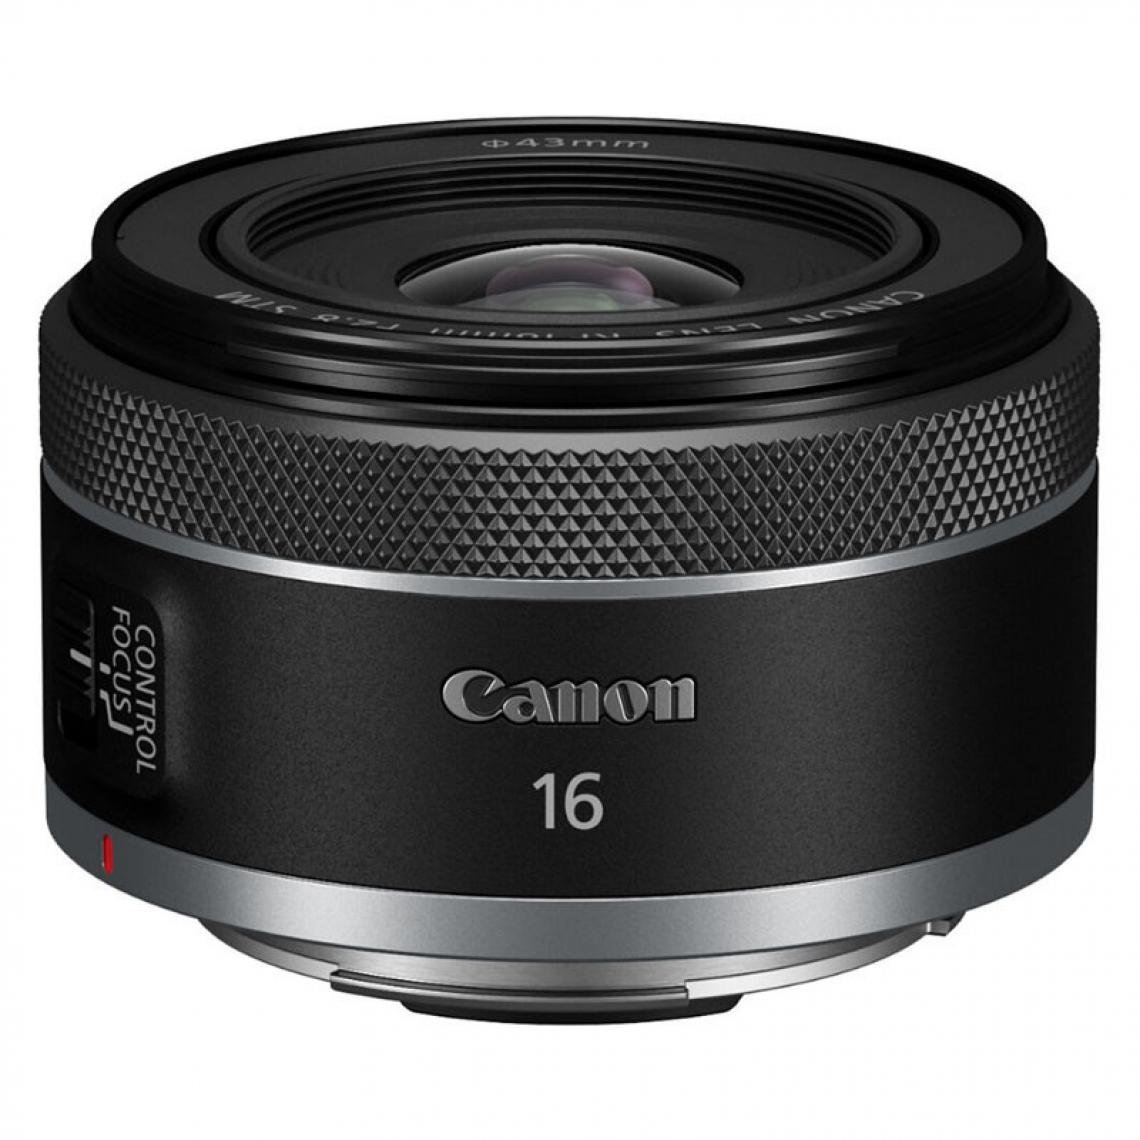 Canon - CANON Objectif RF 16mm F2.8 STM - Objectif Photo